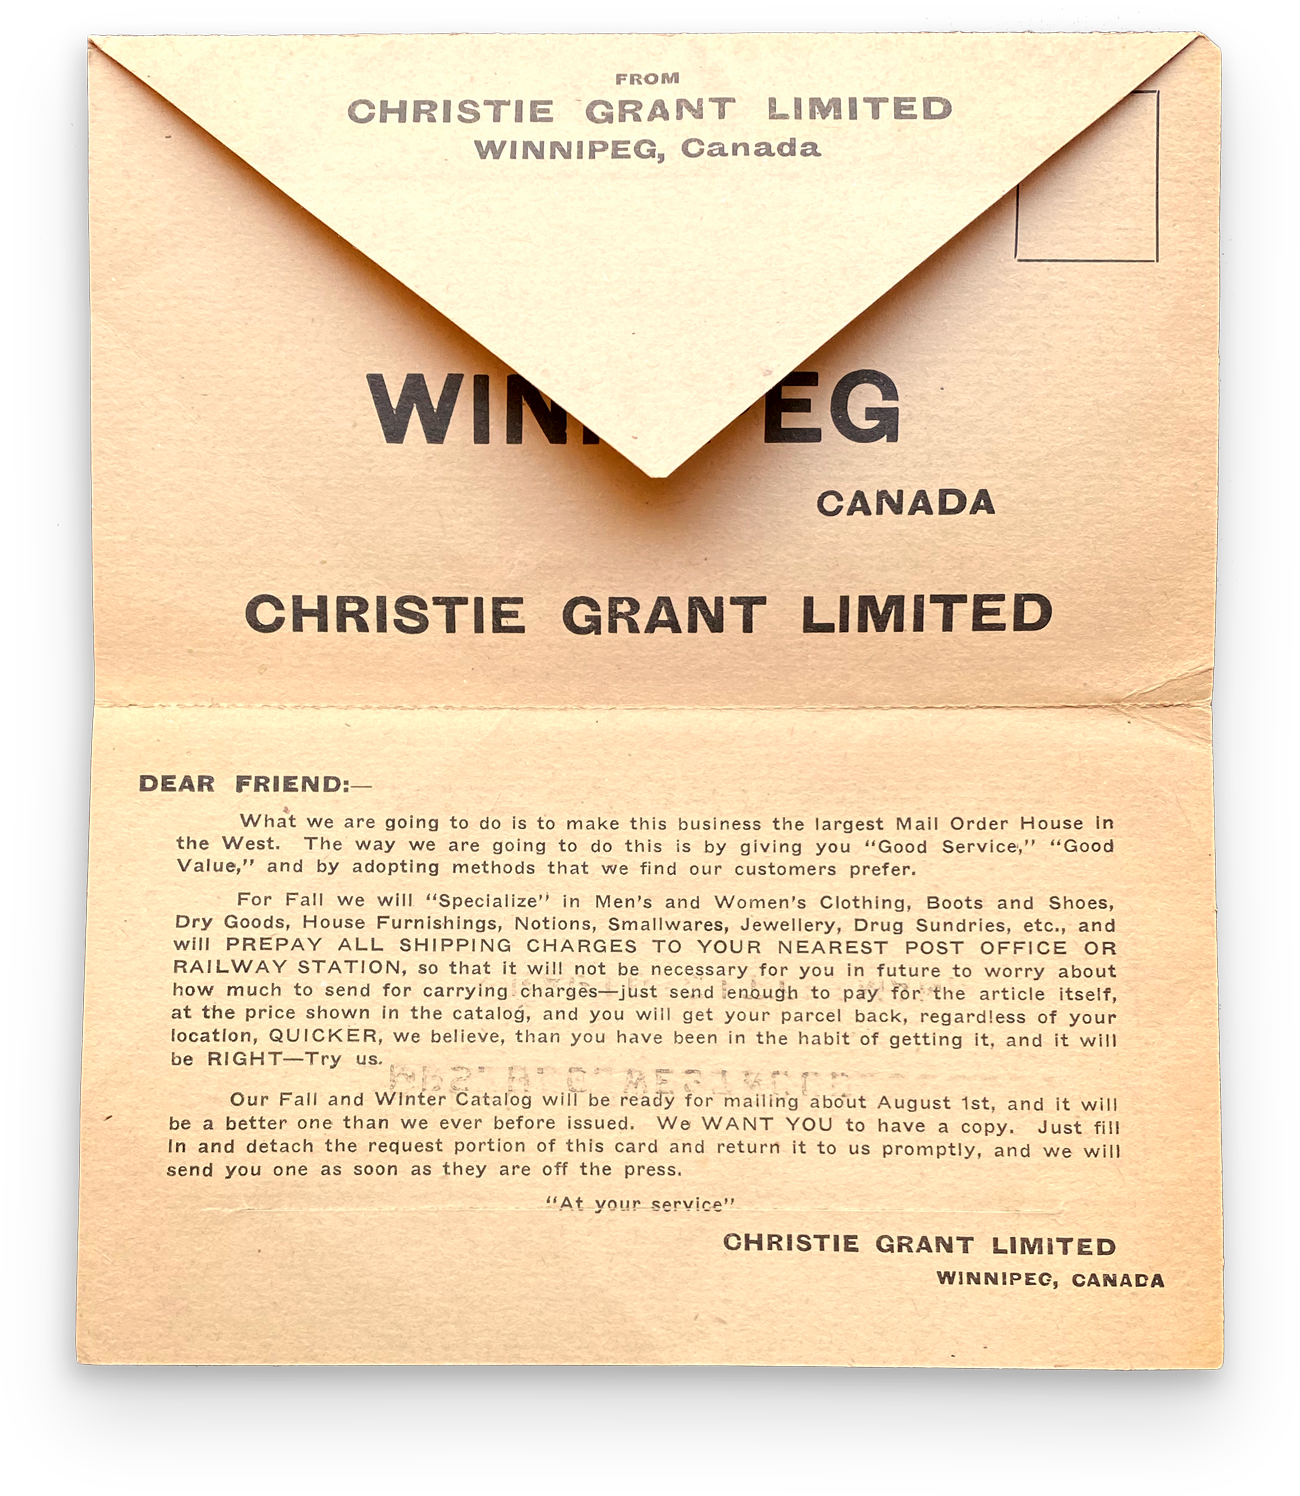 ChristieGrantLimited-Card